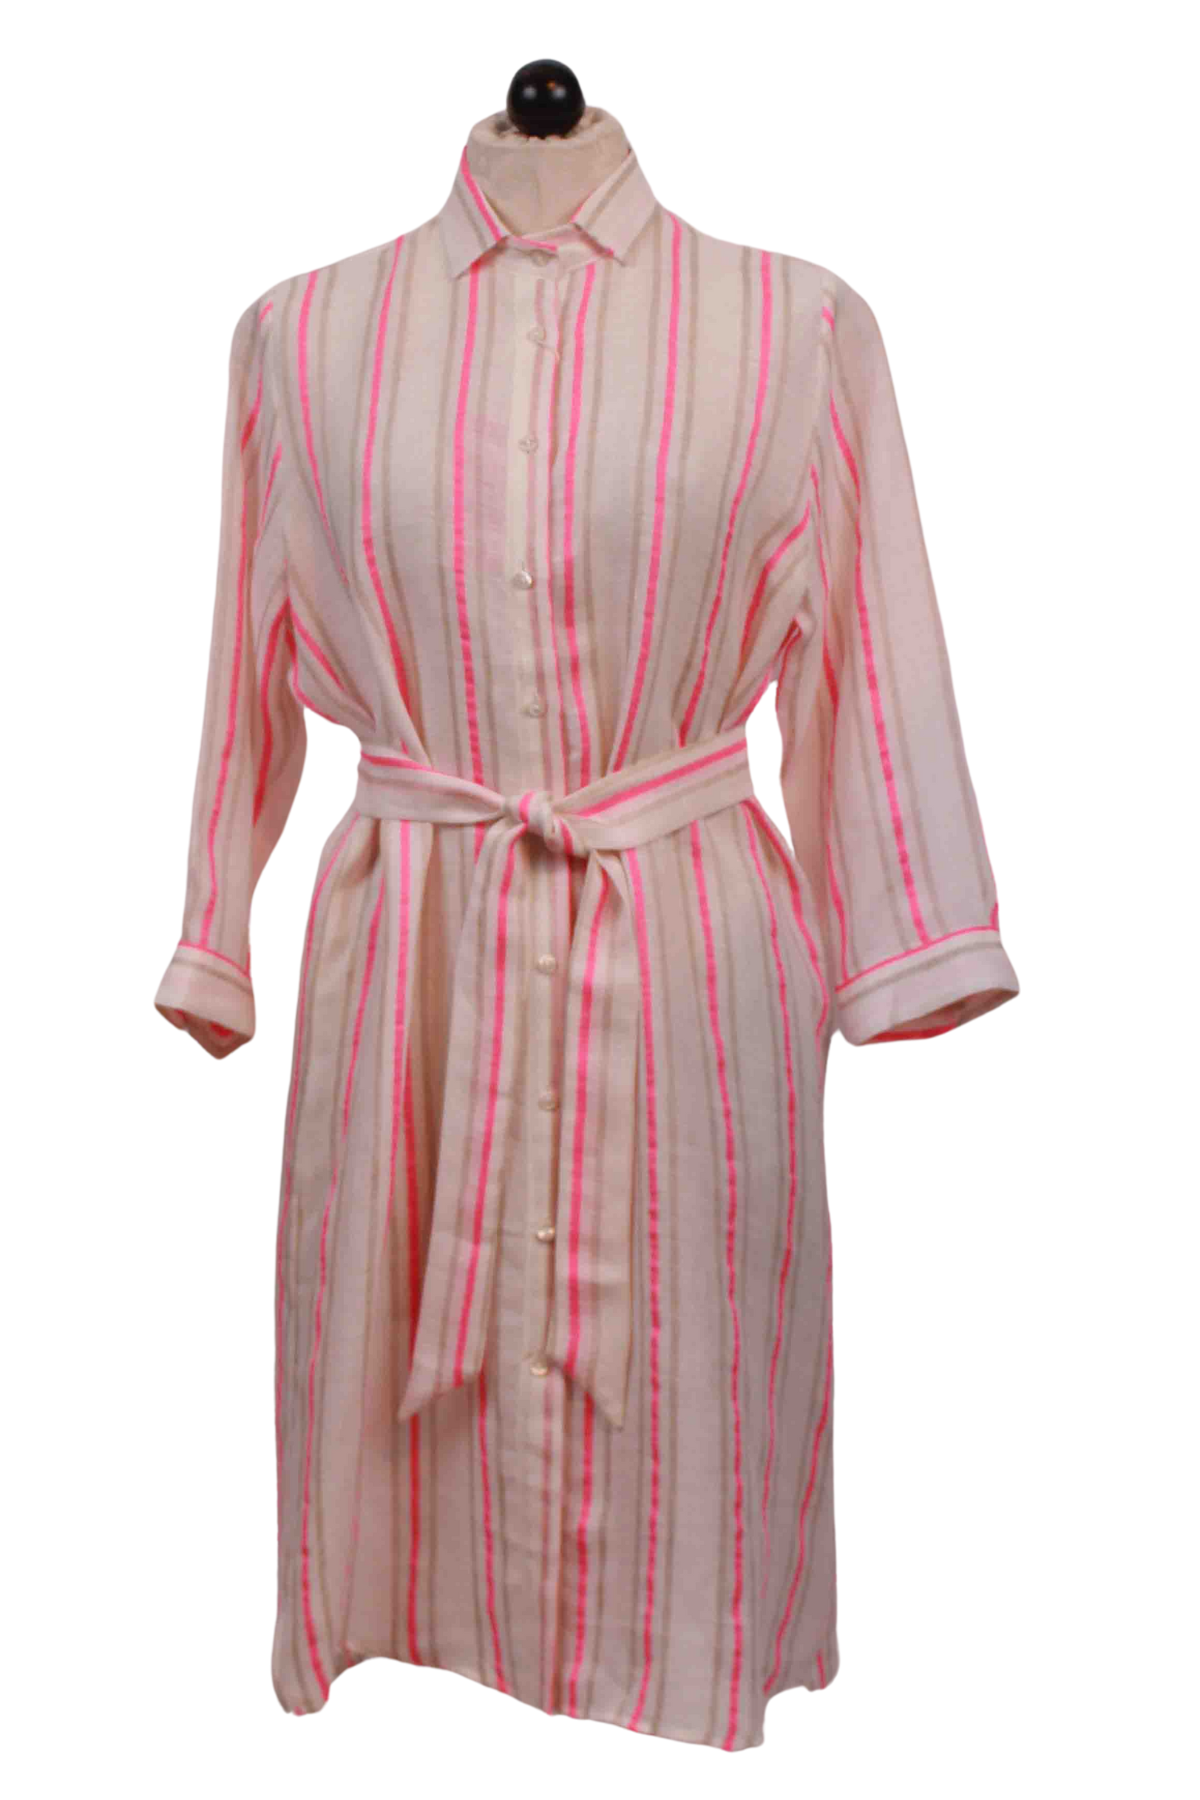 Belted Dover Pink Neon Stripes Dress by Vilagallo